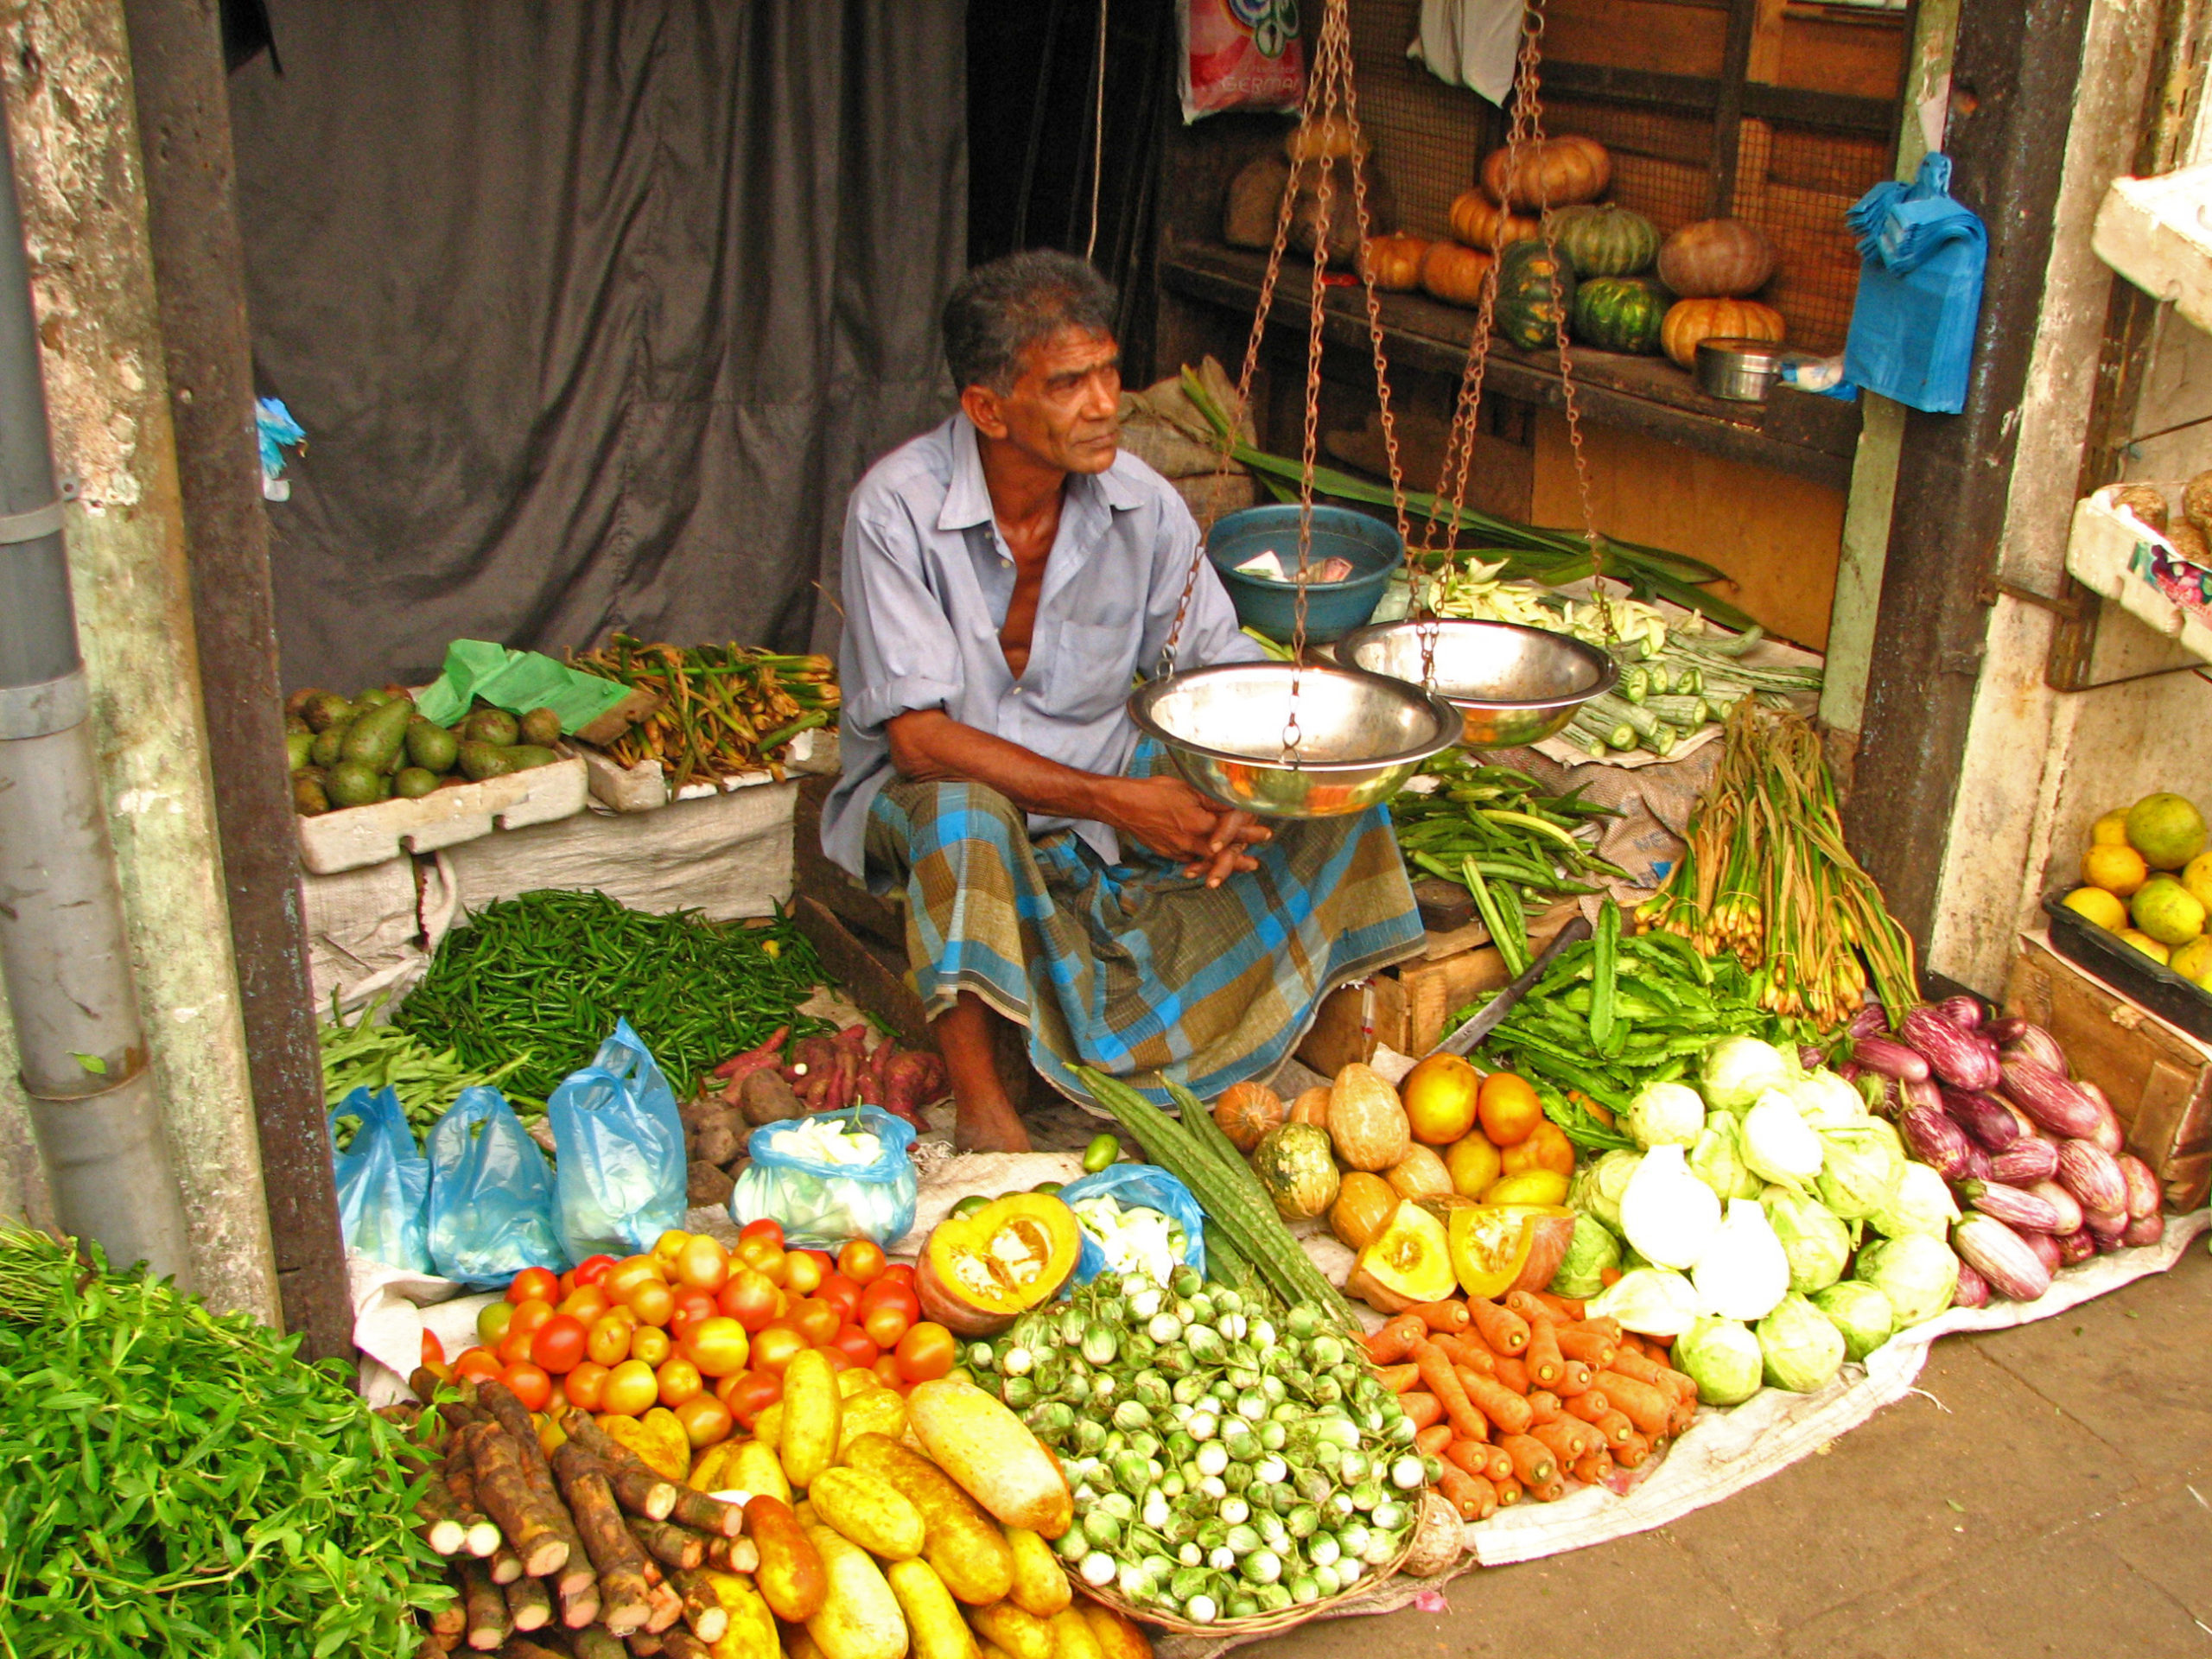 Sri Lanka has enough food for several months to fight Coronavirus say agri ministry, count 97